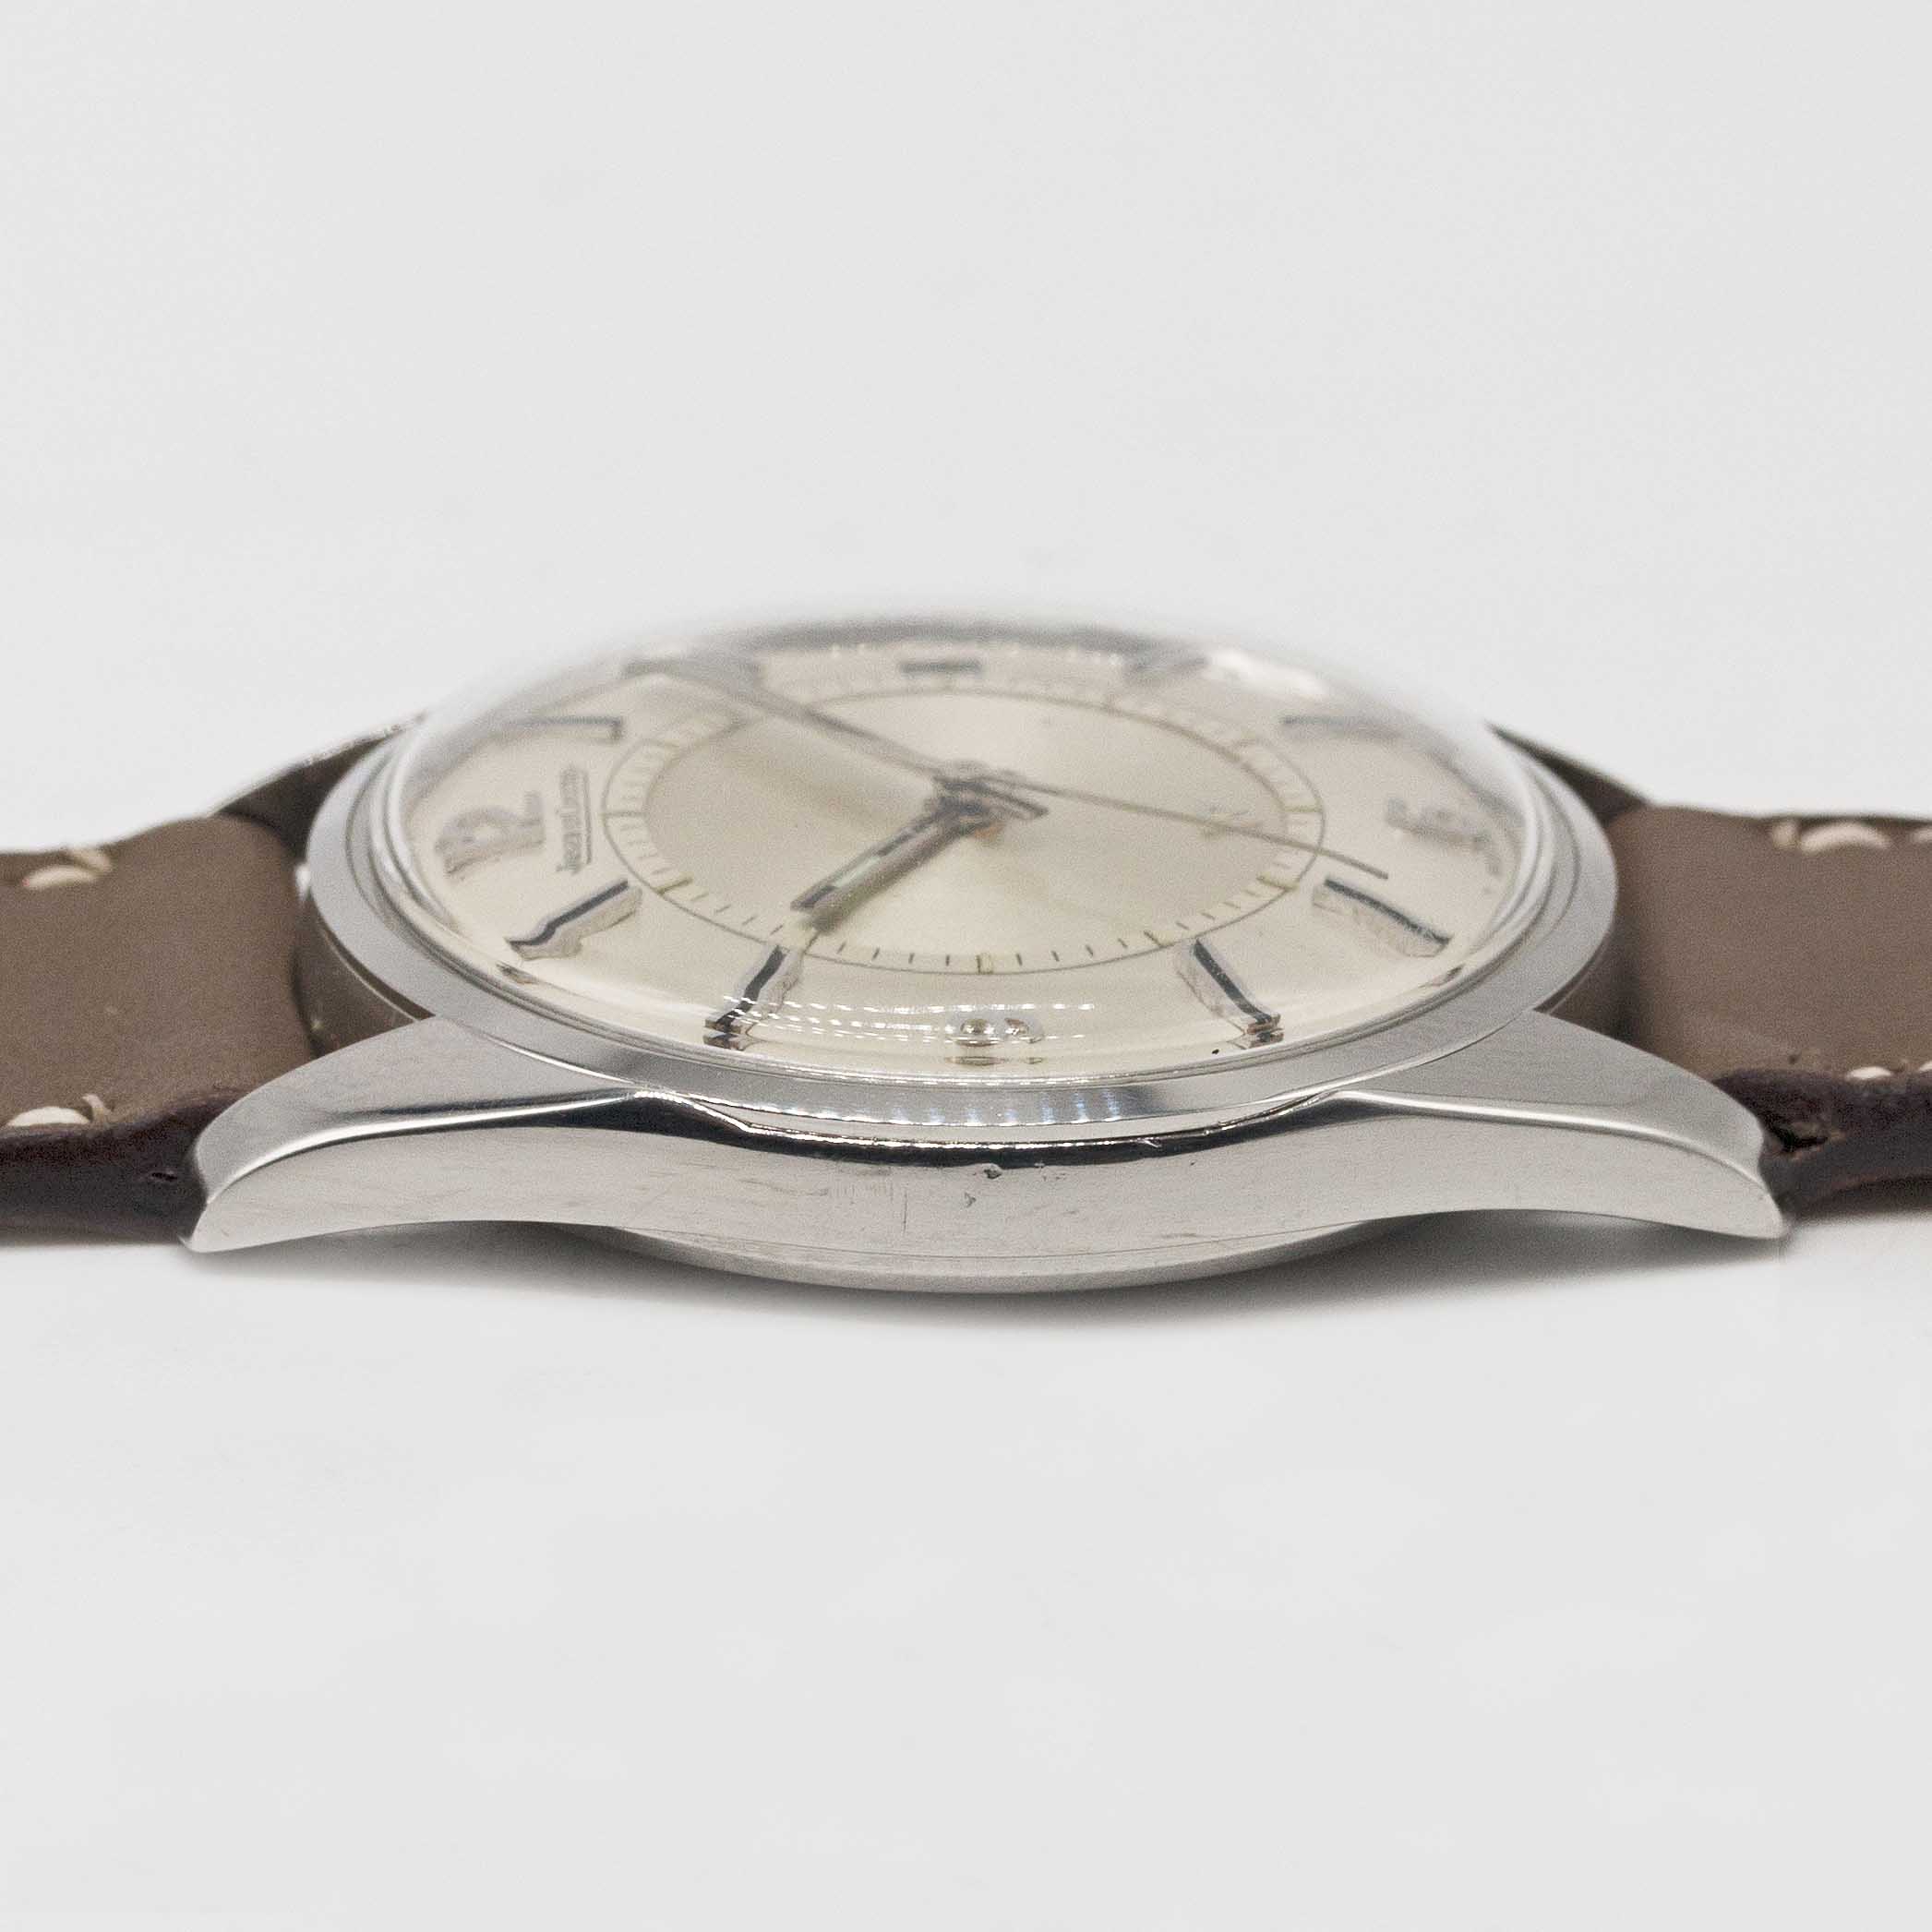 A GENTLEMAN'S STAINLESS STEEL JAEGER LECOULTRE MEMOVOX ALARM WRIST WATCH CIRCA 1960s, WITH QUARTERLY - Image 8 of 8